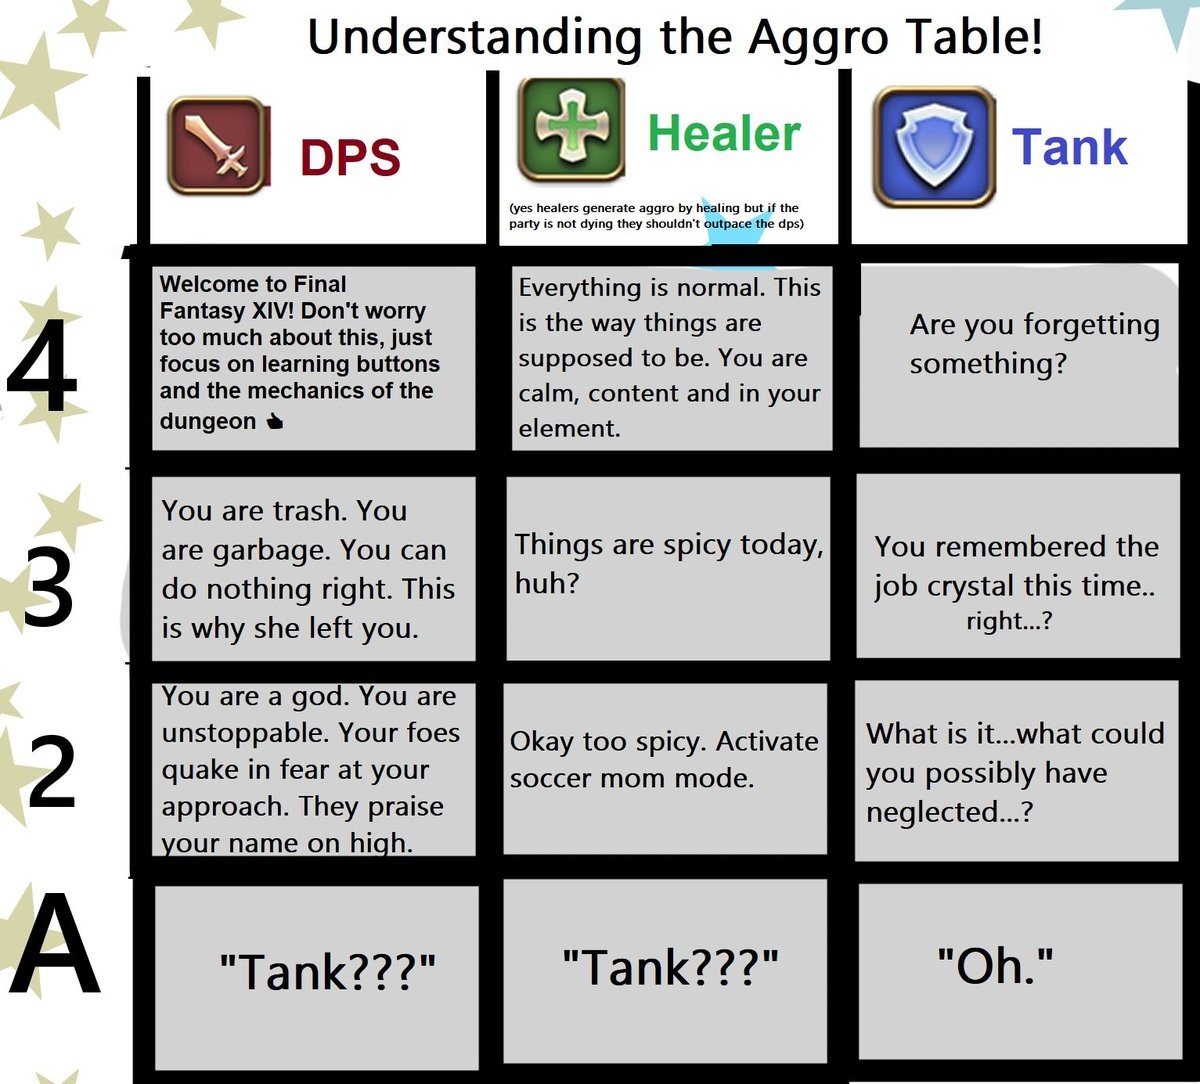 Understanding the Aggro Table. .. love the dps ones. the only thing worse than being last is being second last lol